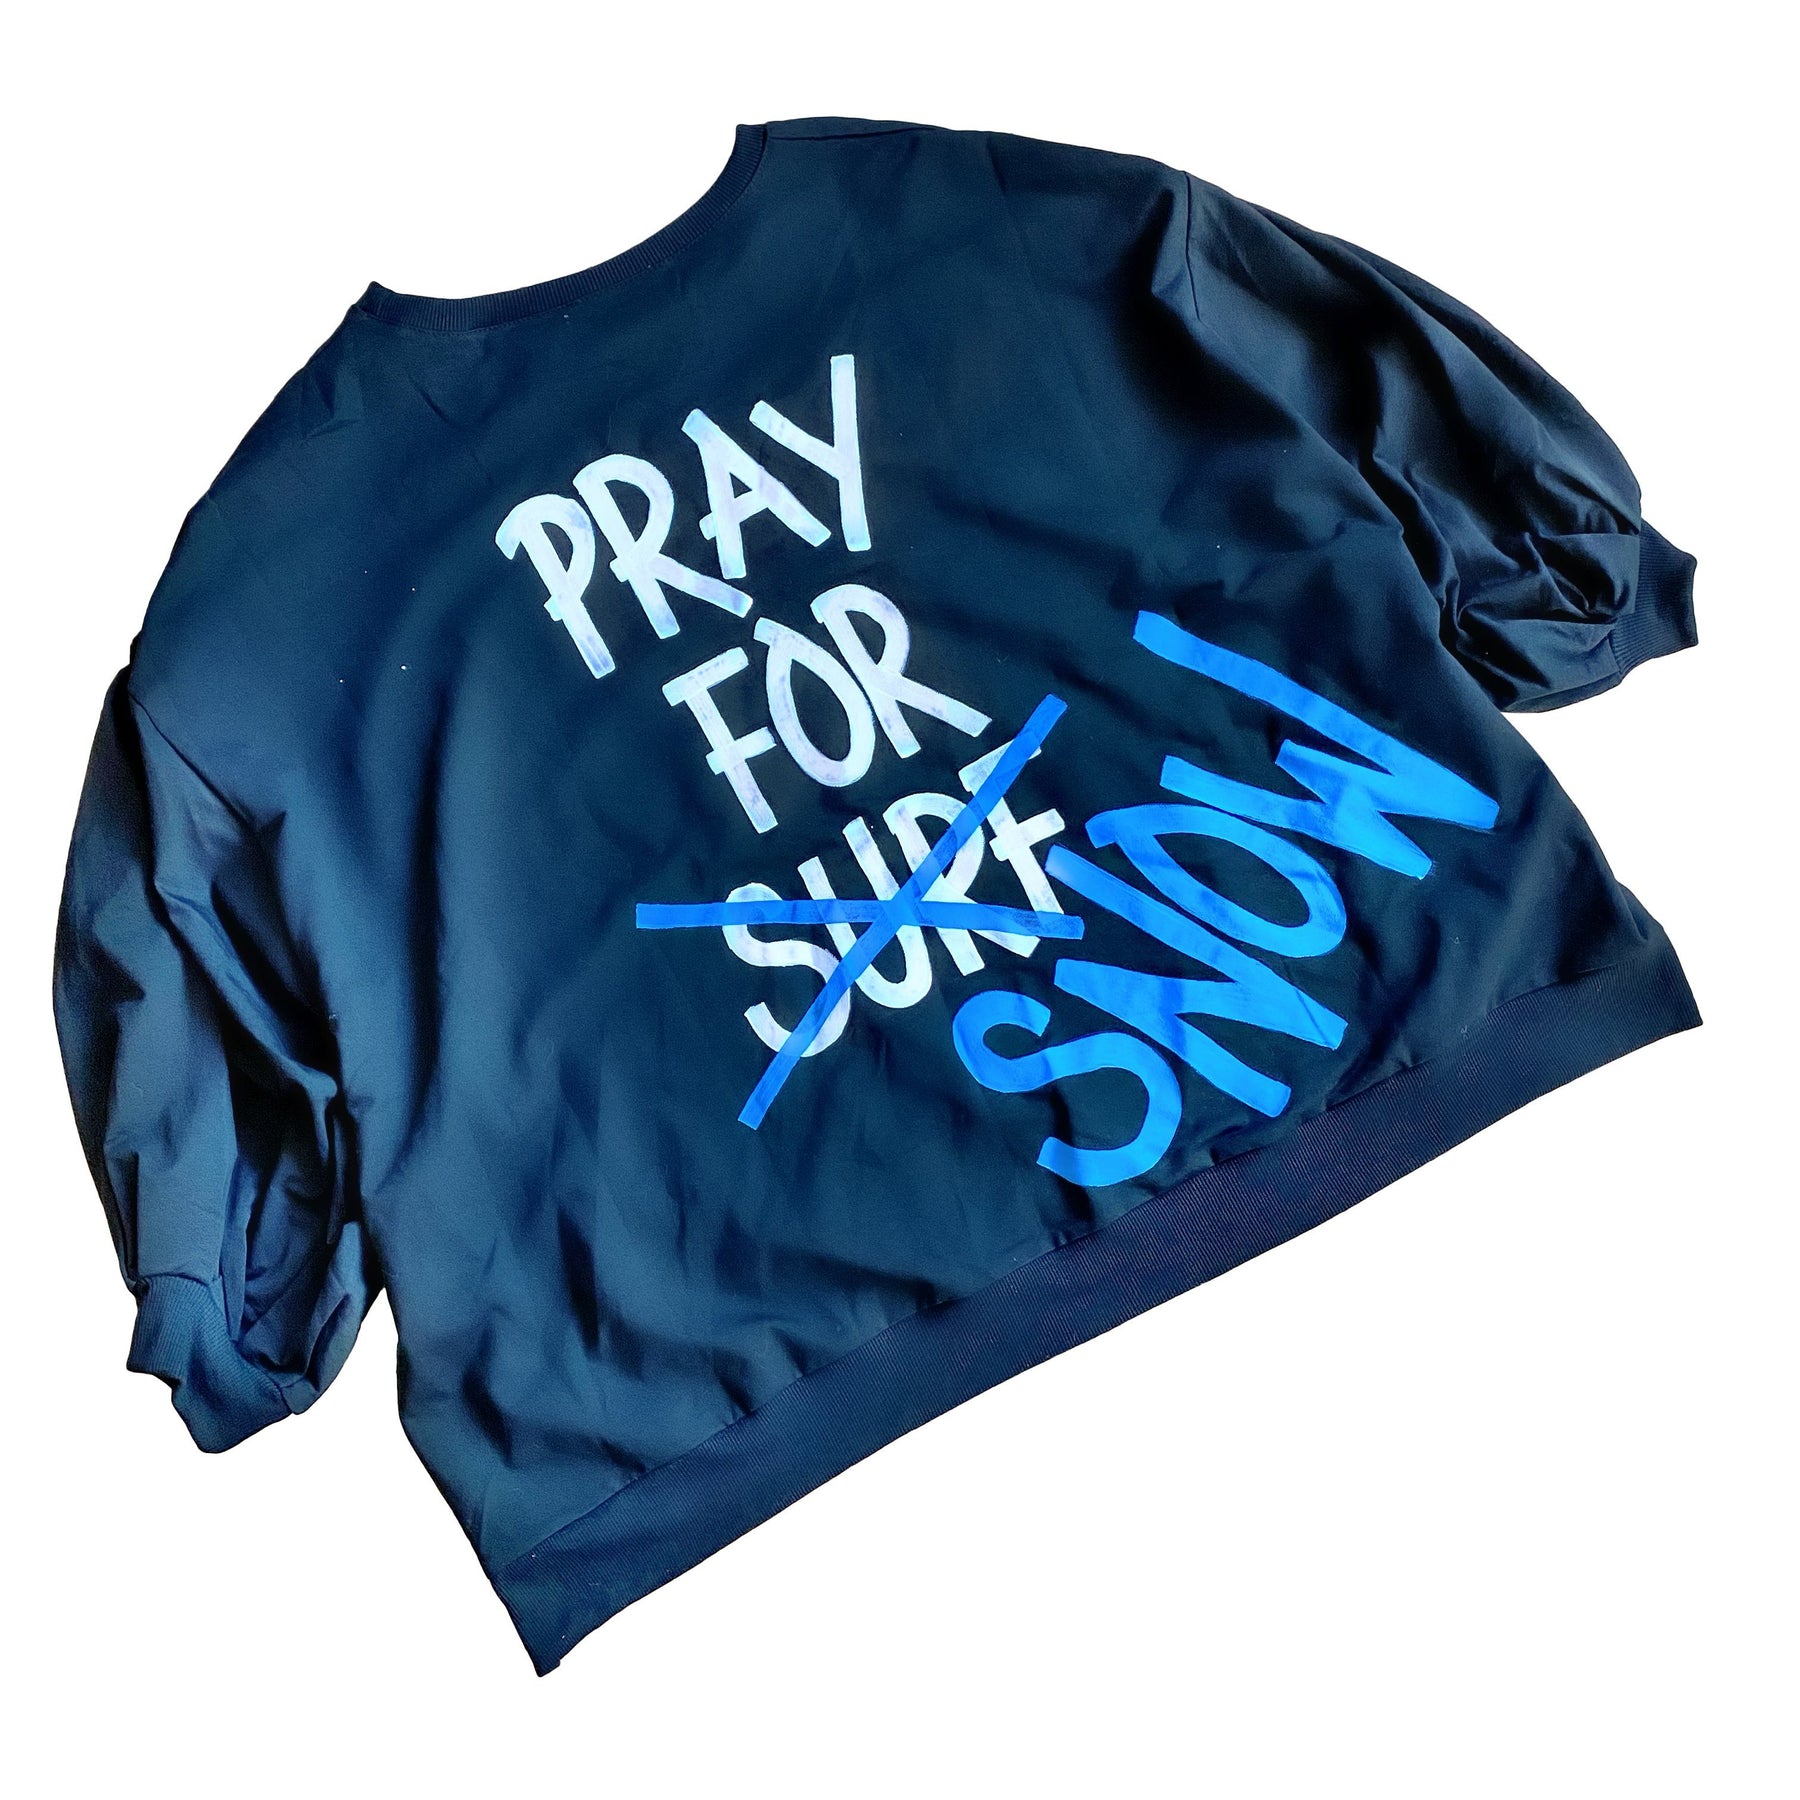 The perfect oversized sweatshirt & jogger loungewear set. TOP: PRAY FOR SURF (crossed out) SNOW painted on the back in white and blue. Small snowflake painted on front, left chest. BOTTOM: Assorted sized and shaped snowflakes painted down leg. Signed @wrenandglory on both top and bottom.